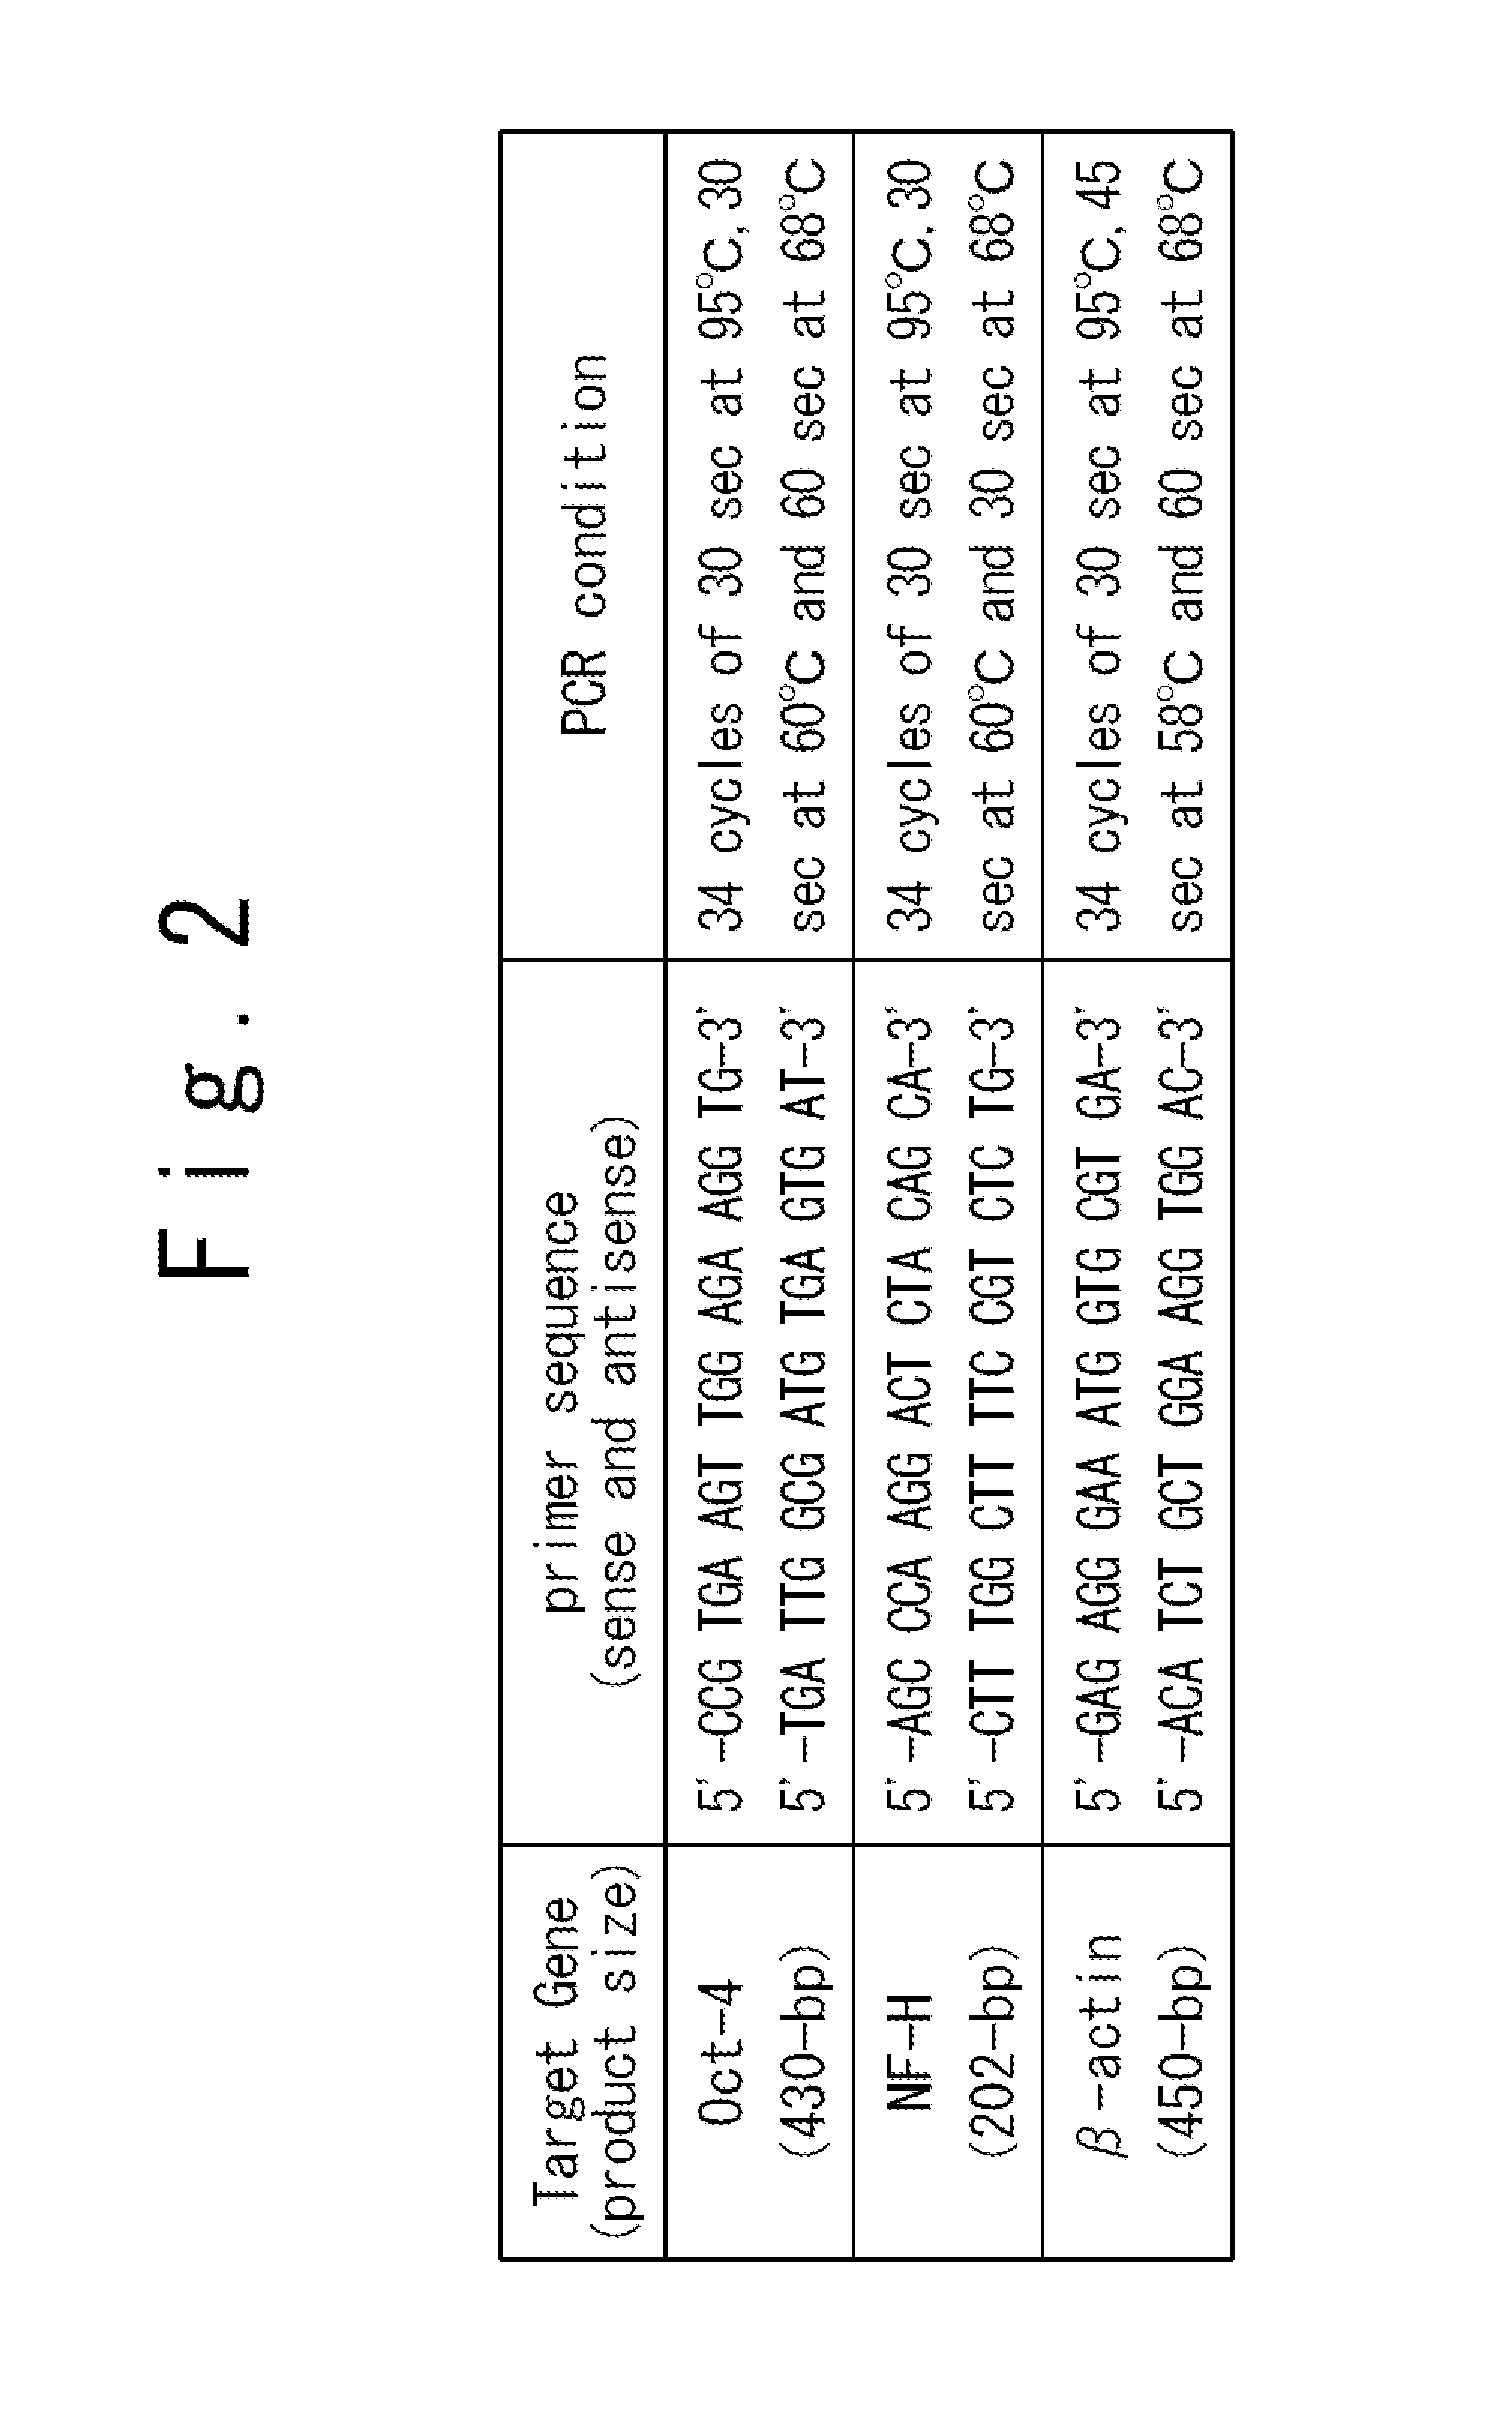 Culture methods of bone marrow stromal cells and mesenchymal stem cells, and manufacture method of graft cells for central nerve system diseases therapy